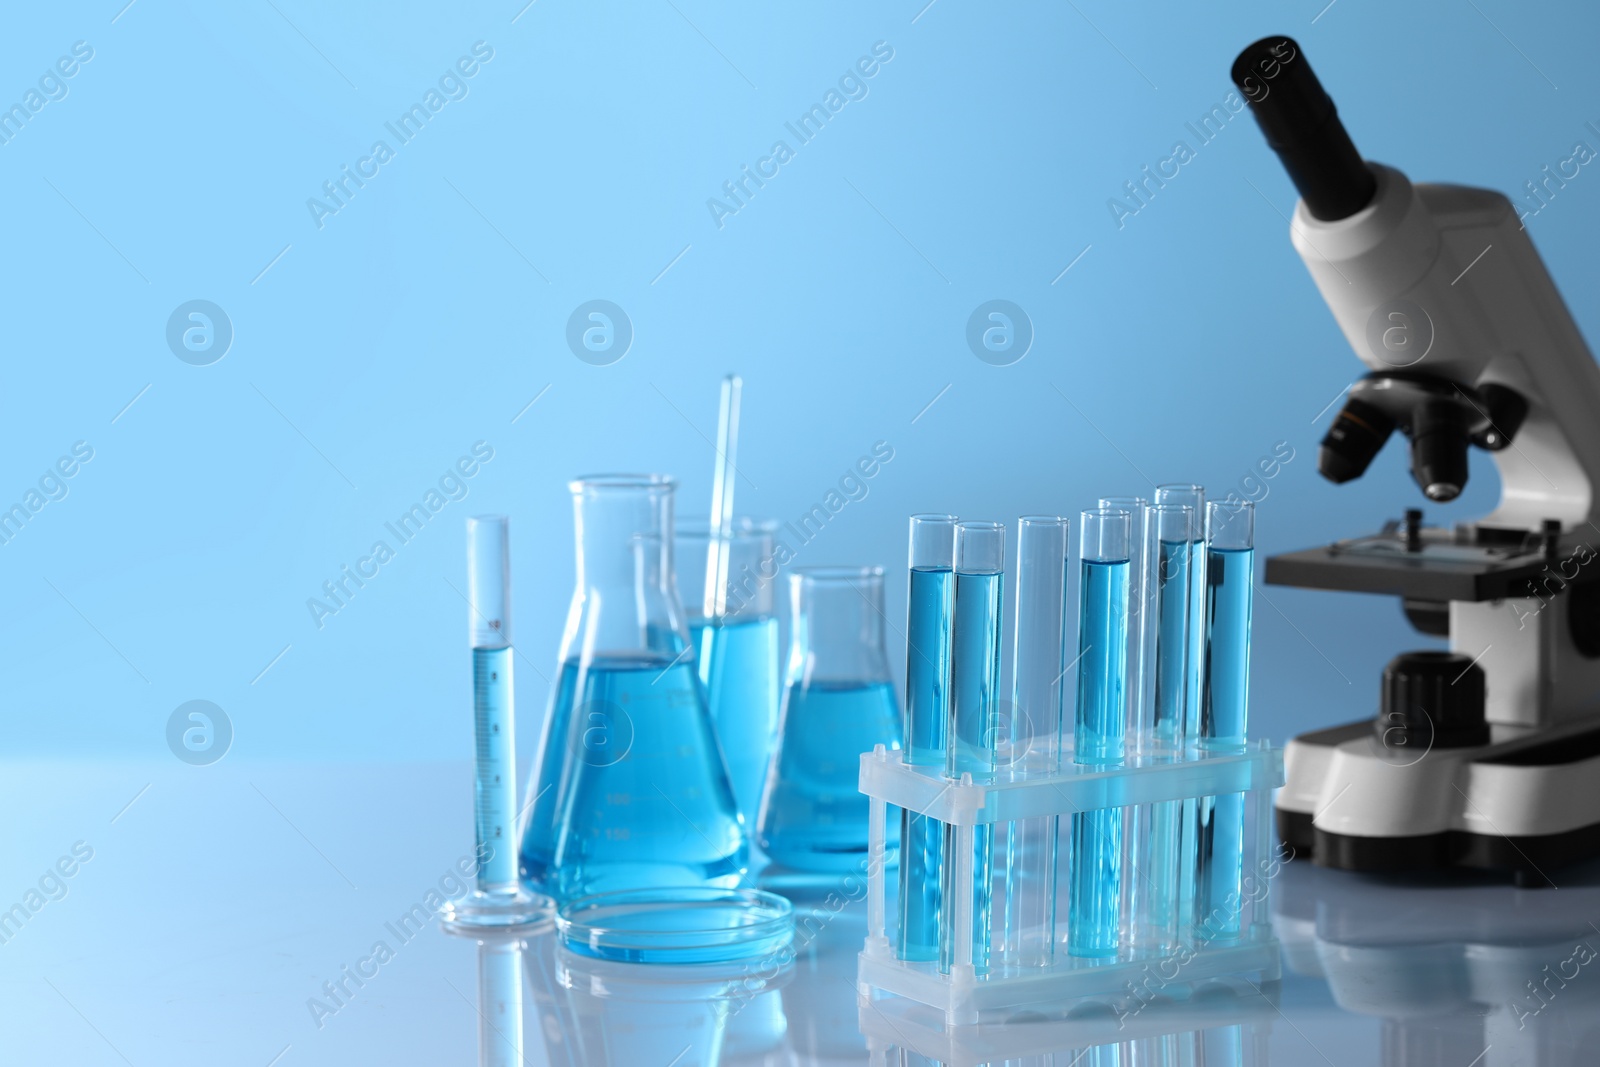 Photo of Microscope near different laboratory glassware and test tubes with light blue liquid on table